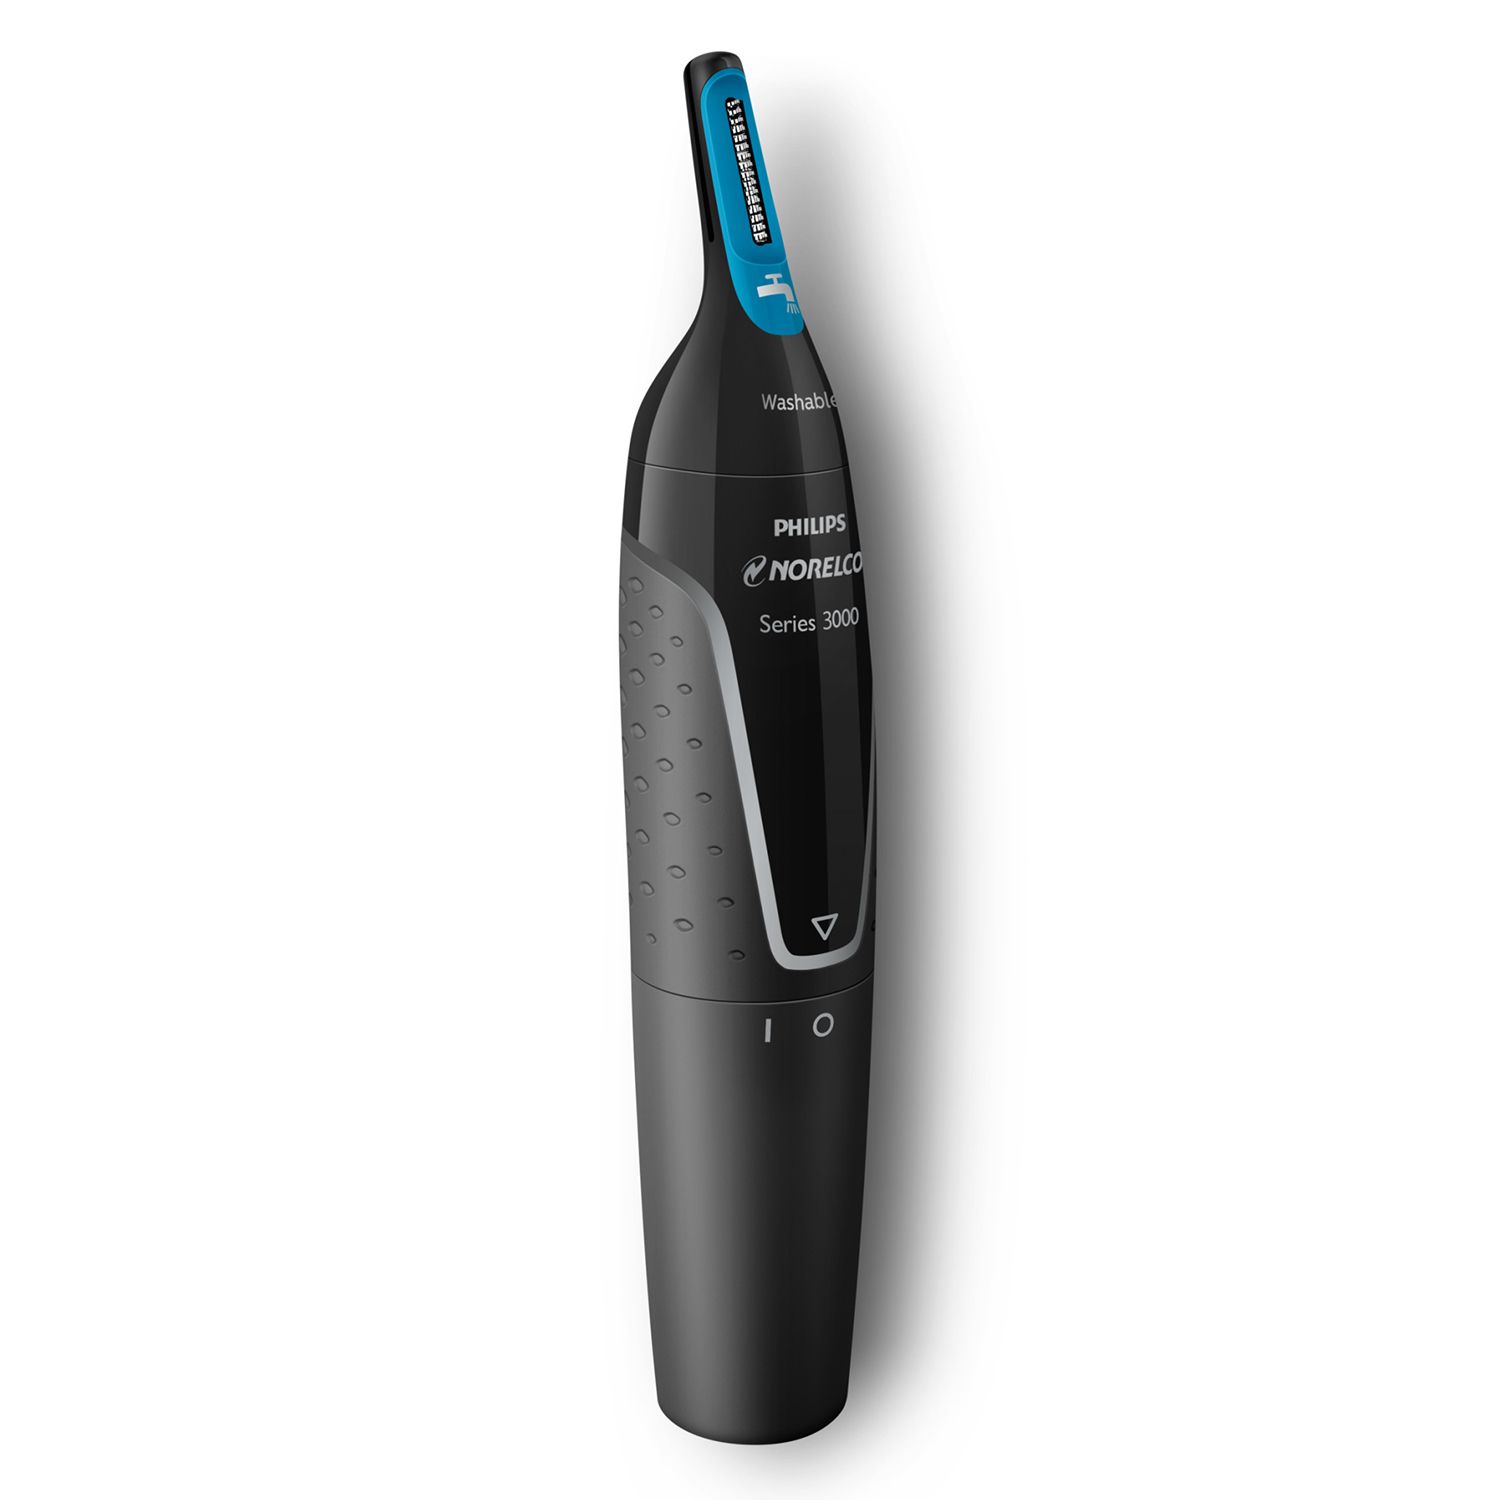 fitfort 6619 hair clippers